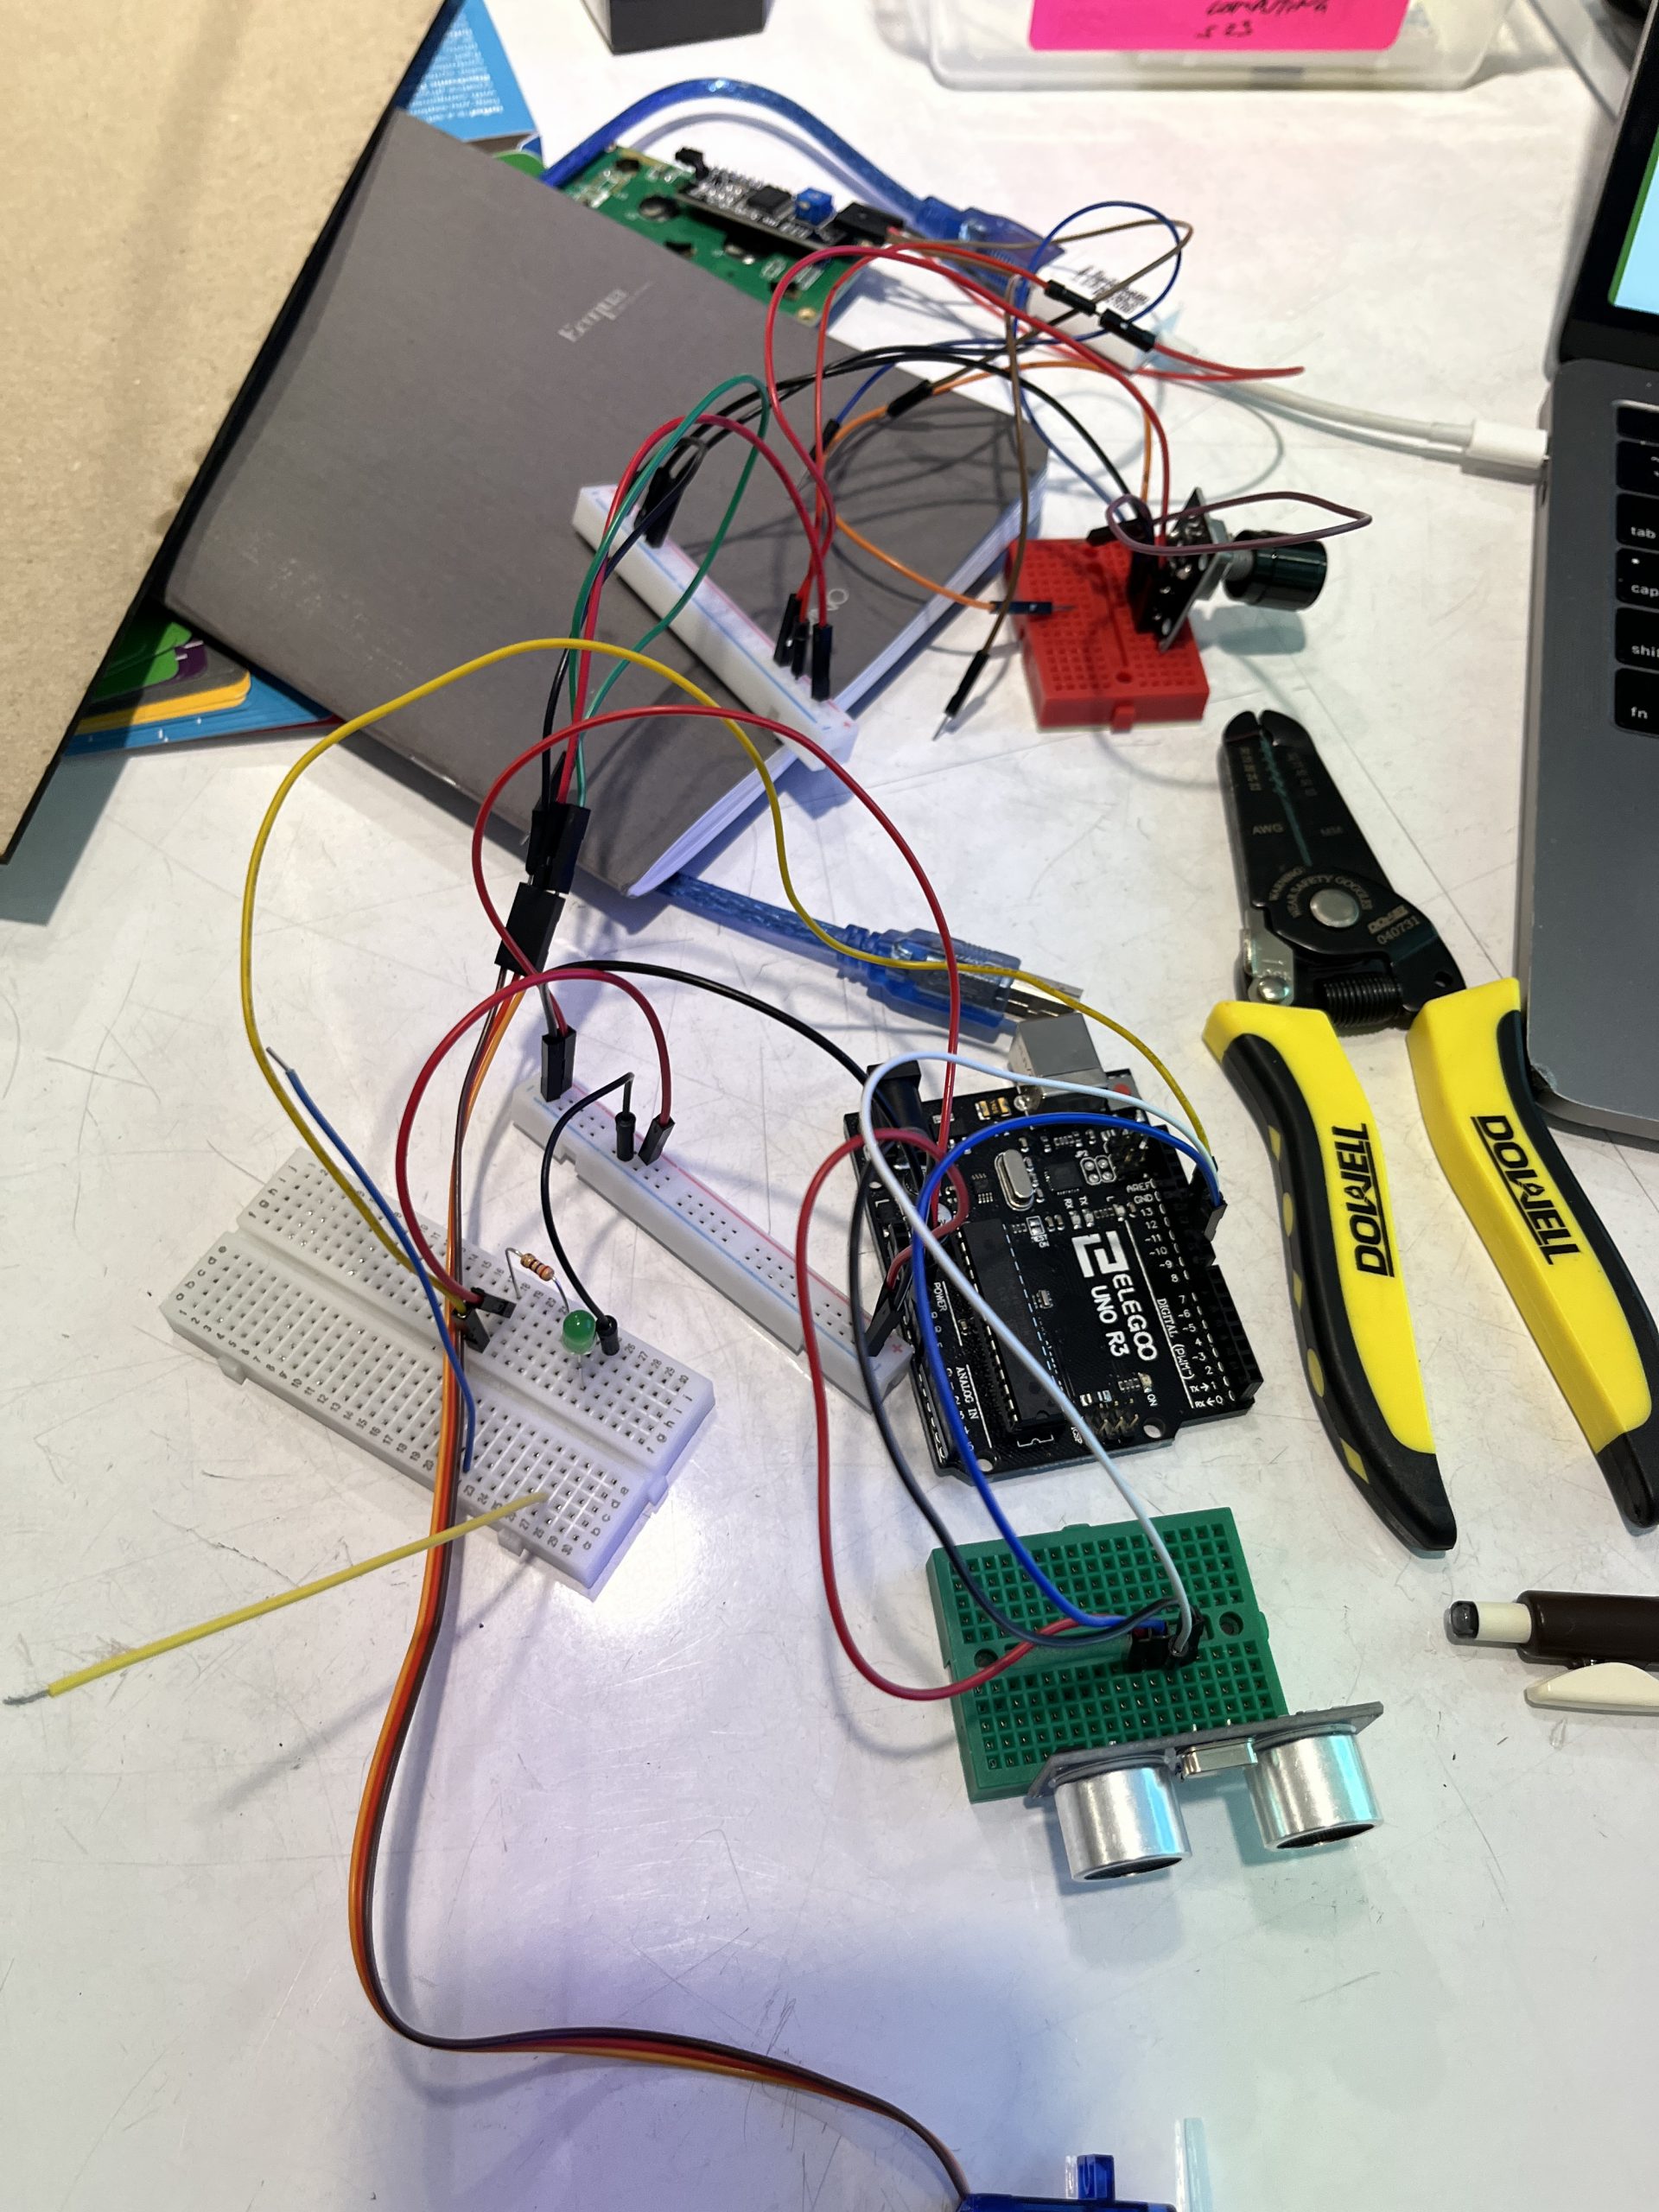 A mess of wires and breadboards, with an Arduino and ultrasonic ranger in the middle.